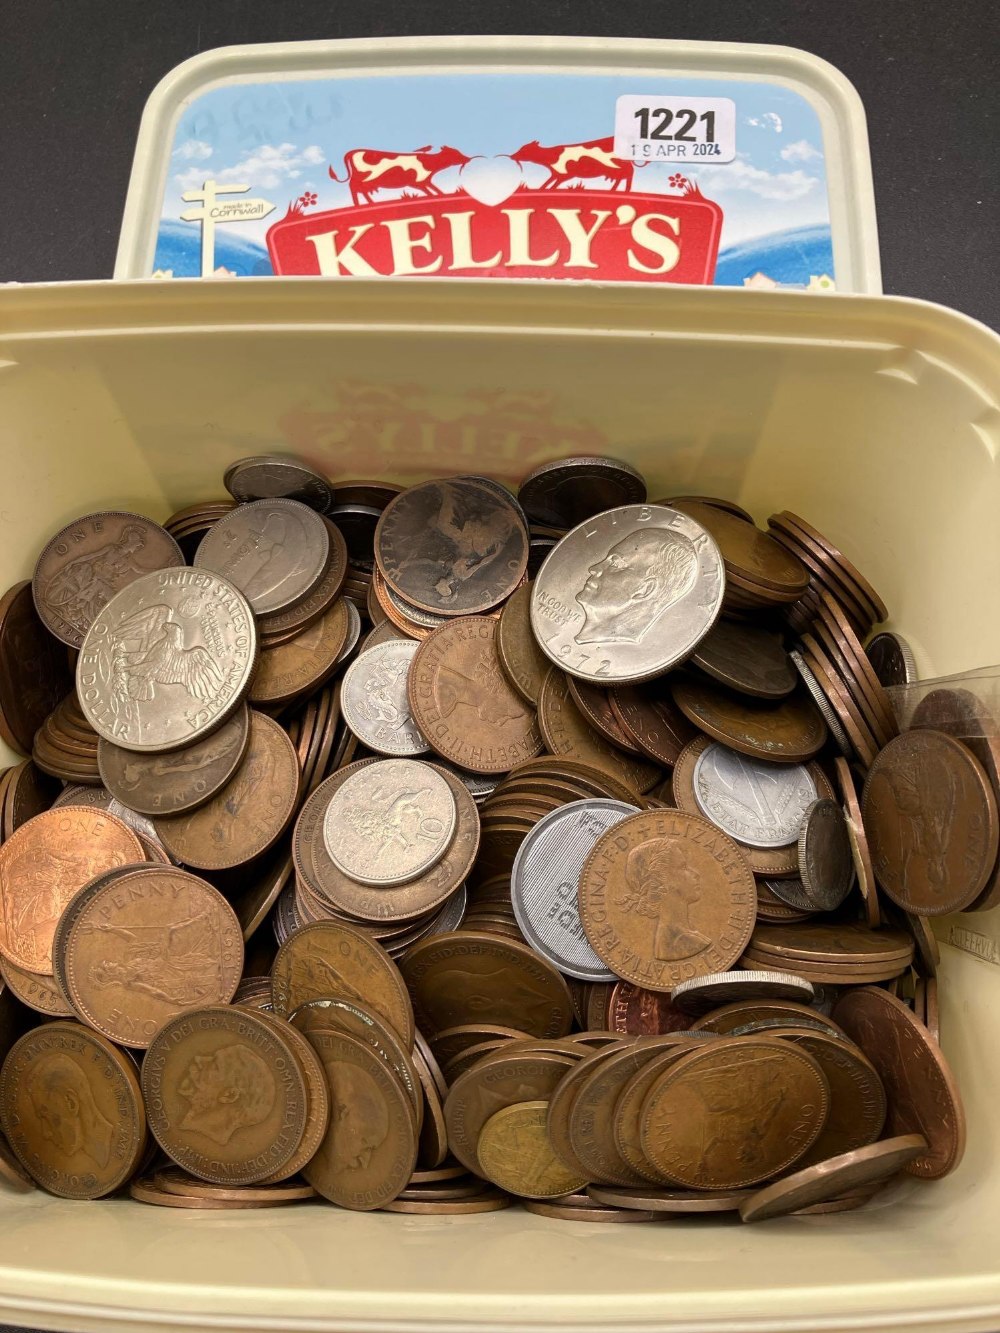 Tub of coins including 4 silver